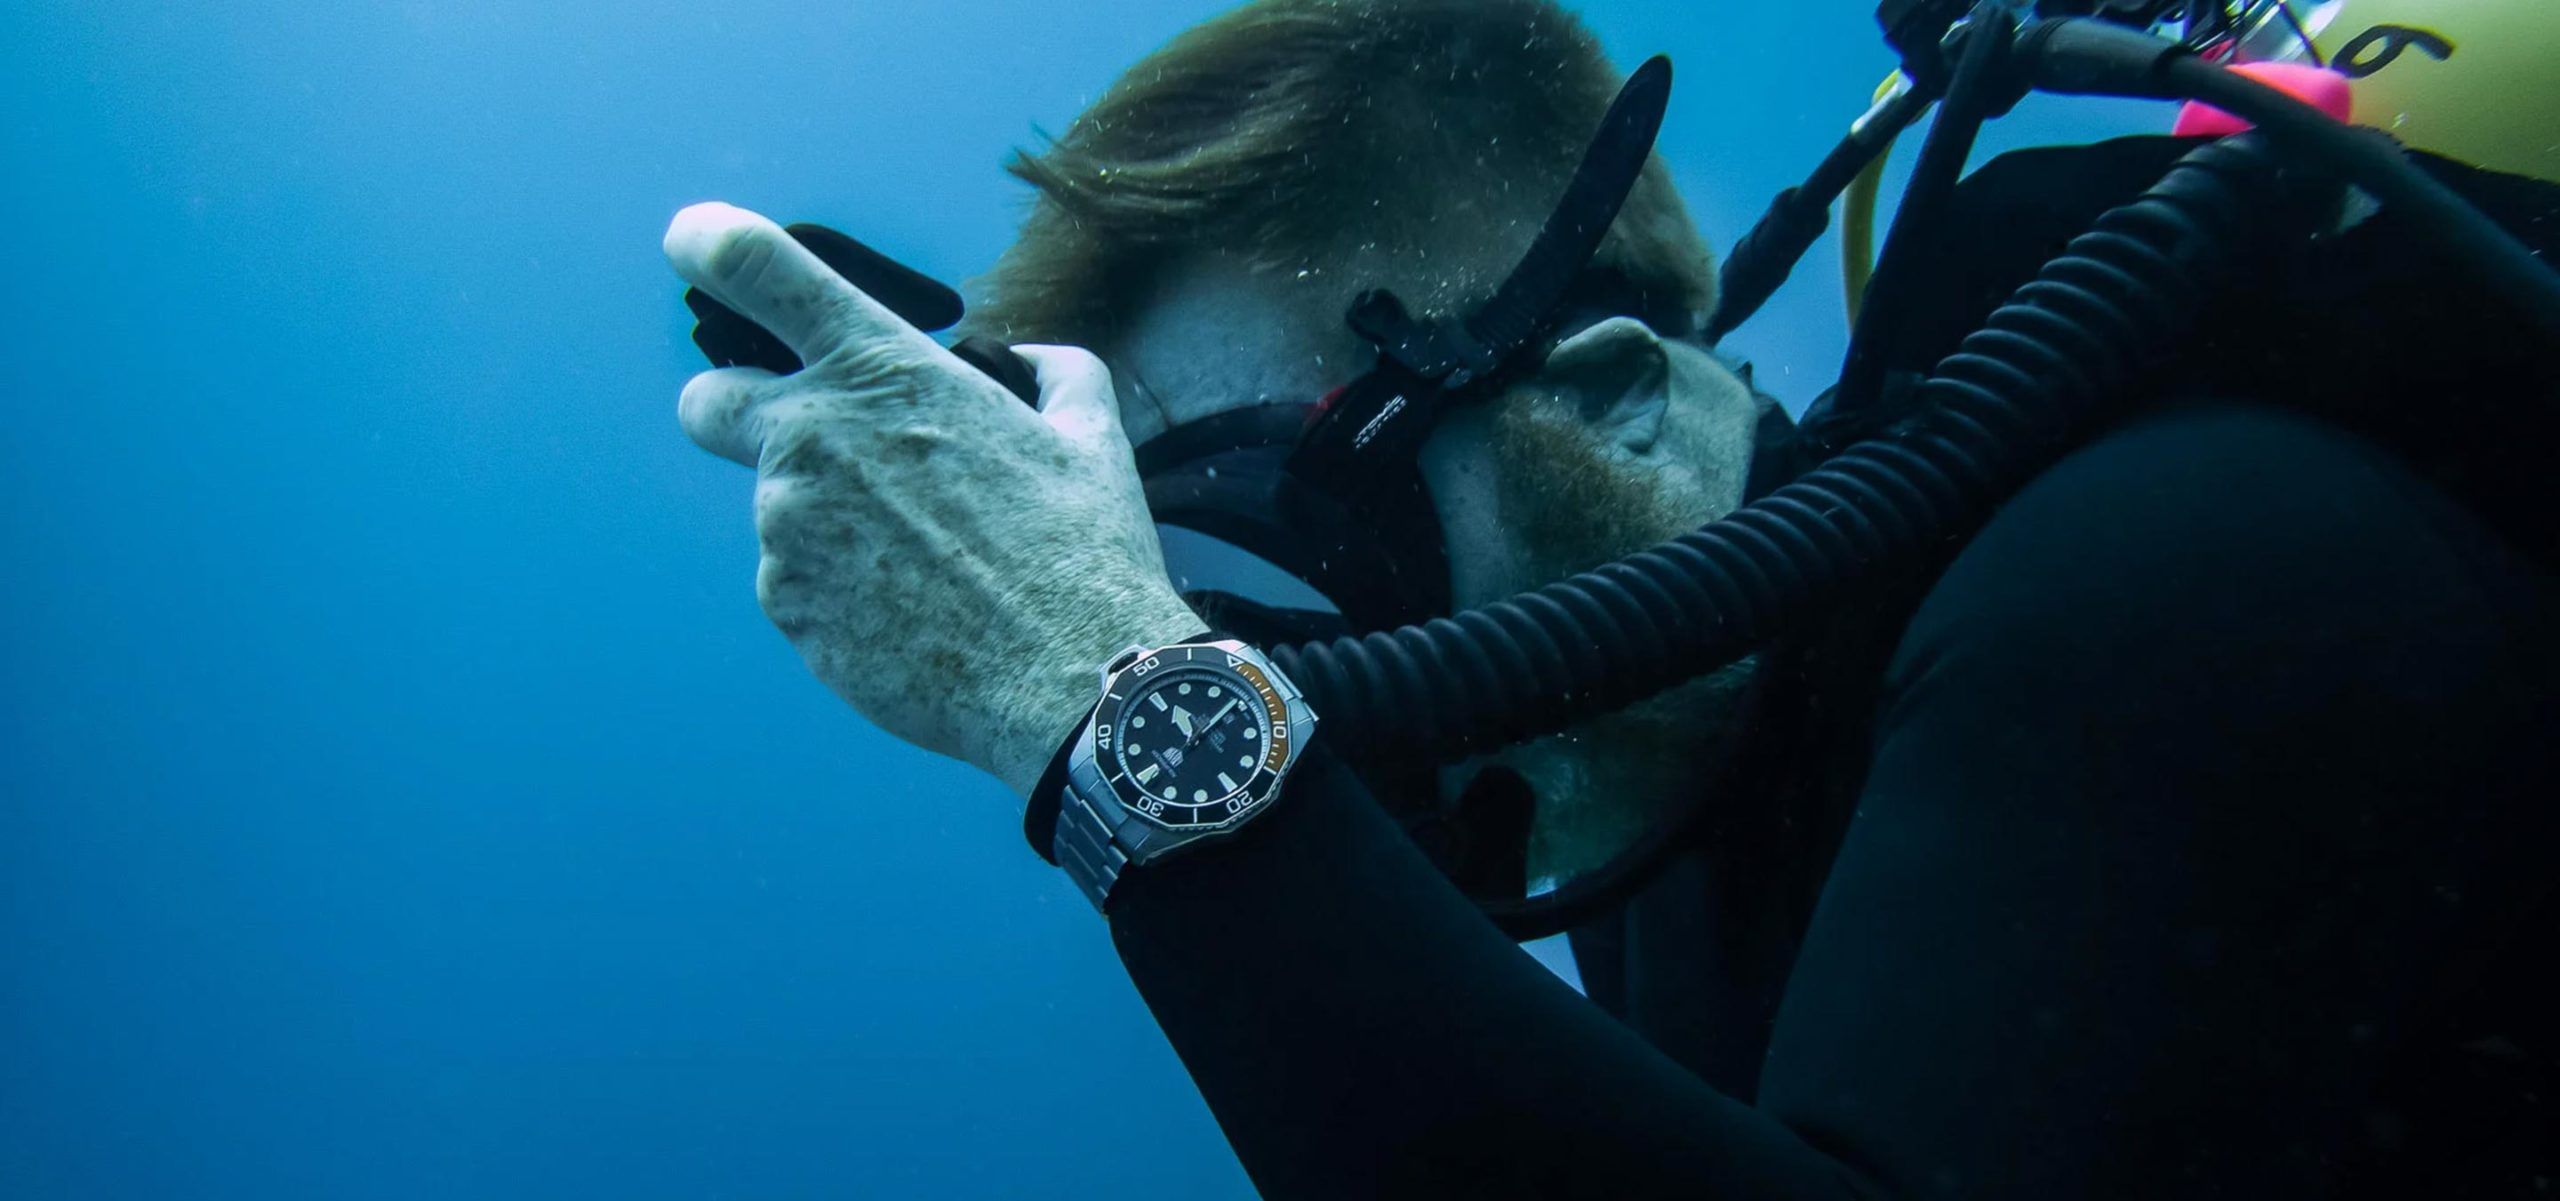 The Dive Watch Guide Part Four: Watch Care, Advanced Features, And Sustainability